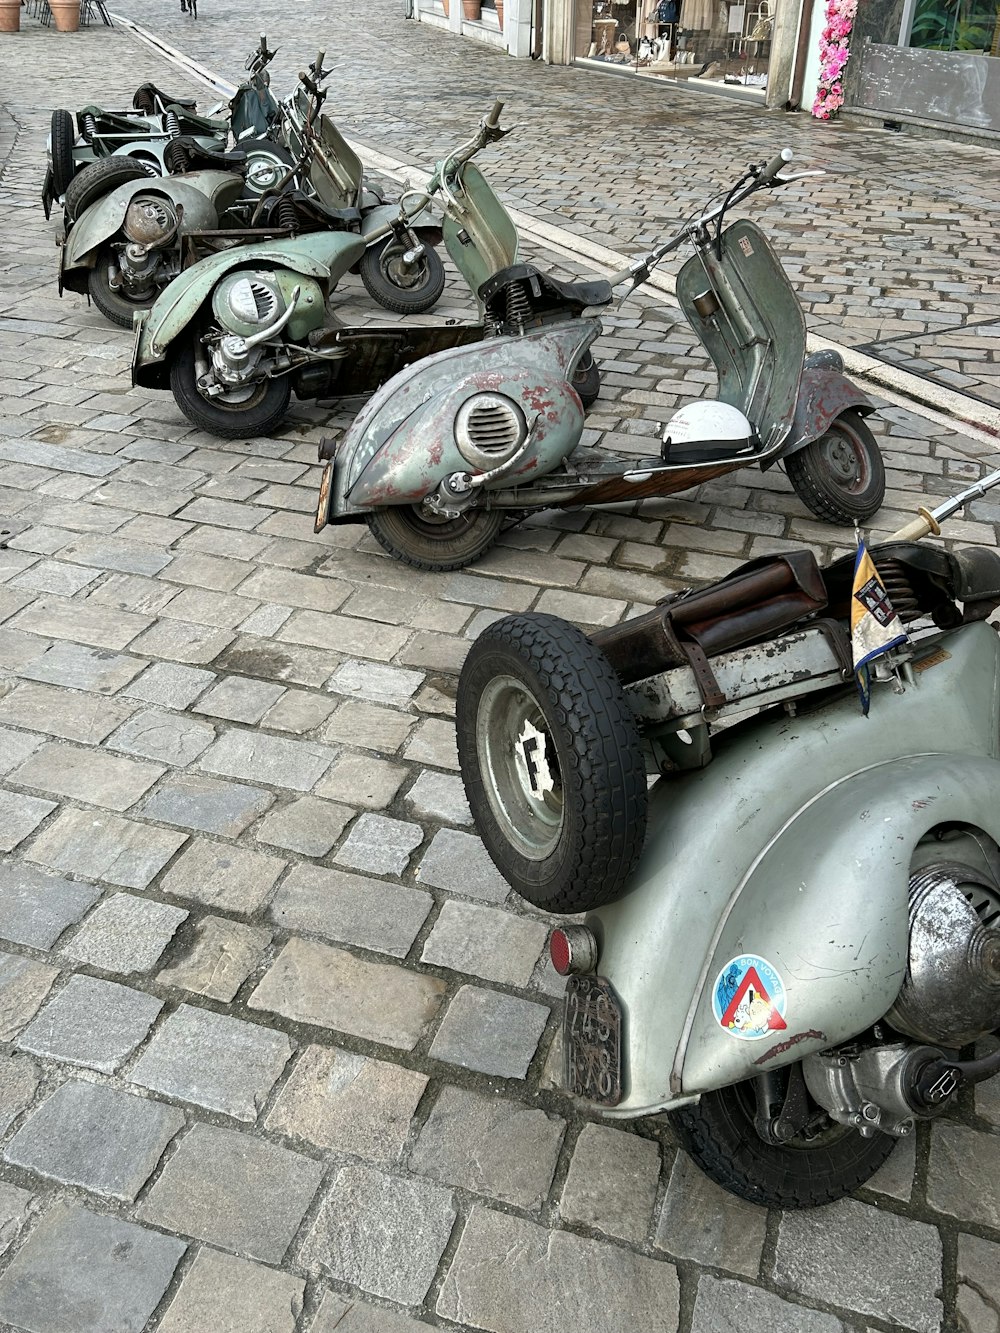 a row of scooters parked on a brick road